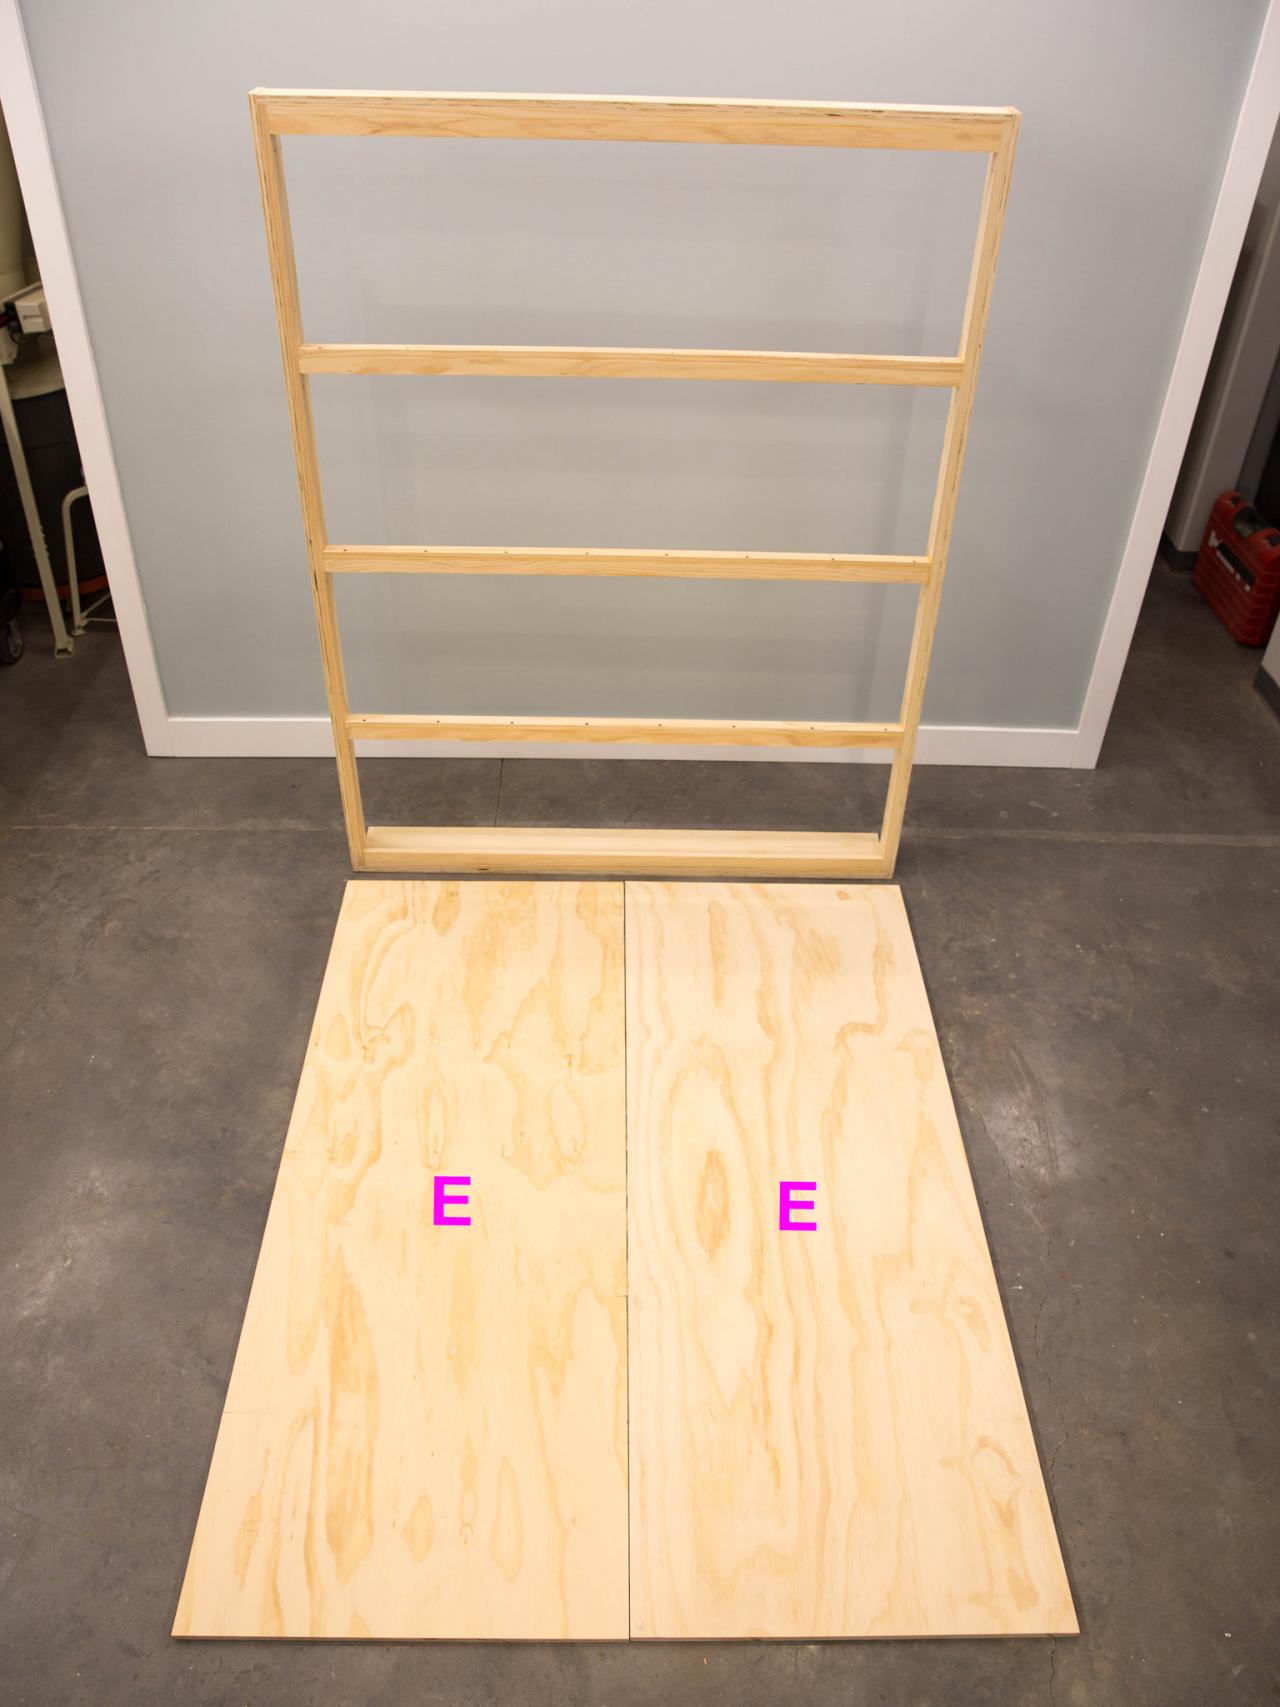 How To Build A Murphy Bed, How To Build A Murphy Bed Free Plans